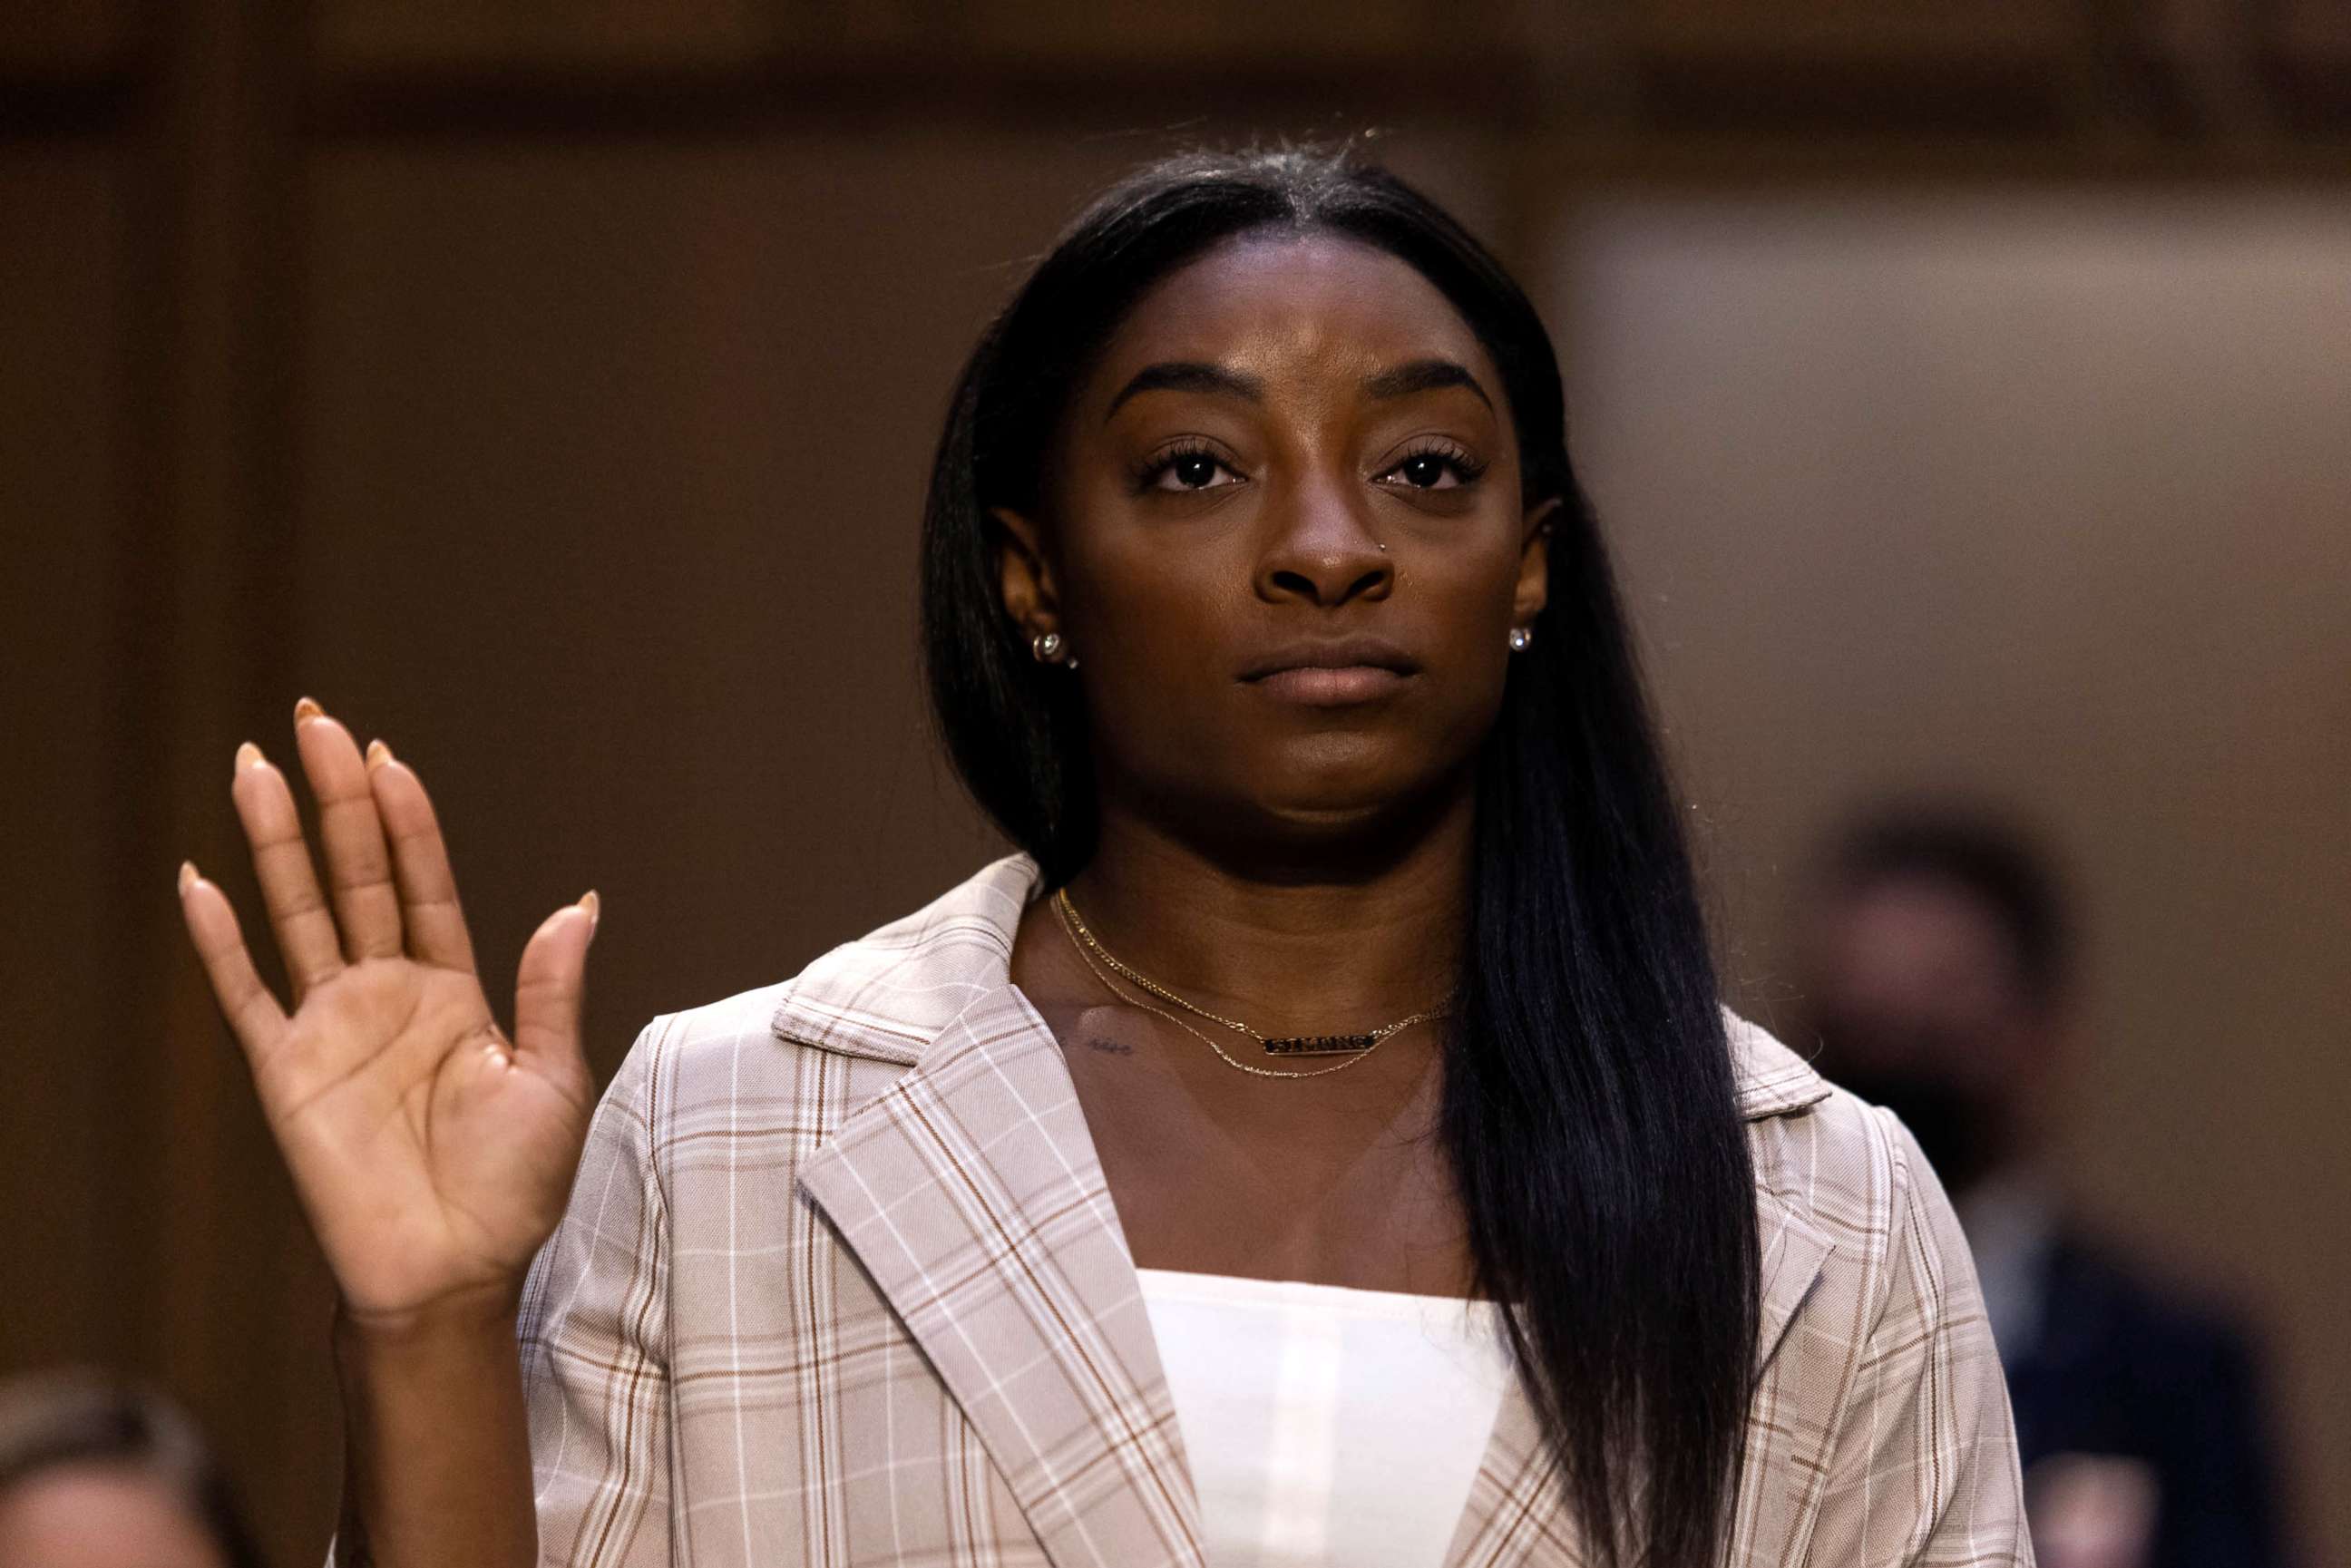 PHOTO: U.S. Olympic gymnast Simone Biles is sworn in during a Senate Judiciary hearing about the Larry Nassar sexual abuse investigation on Sept. 15, 2021, in Washington, D.C.